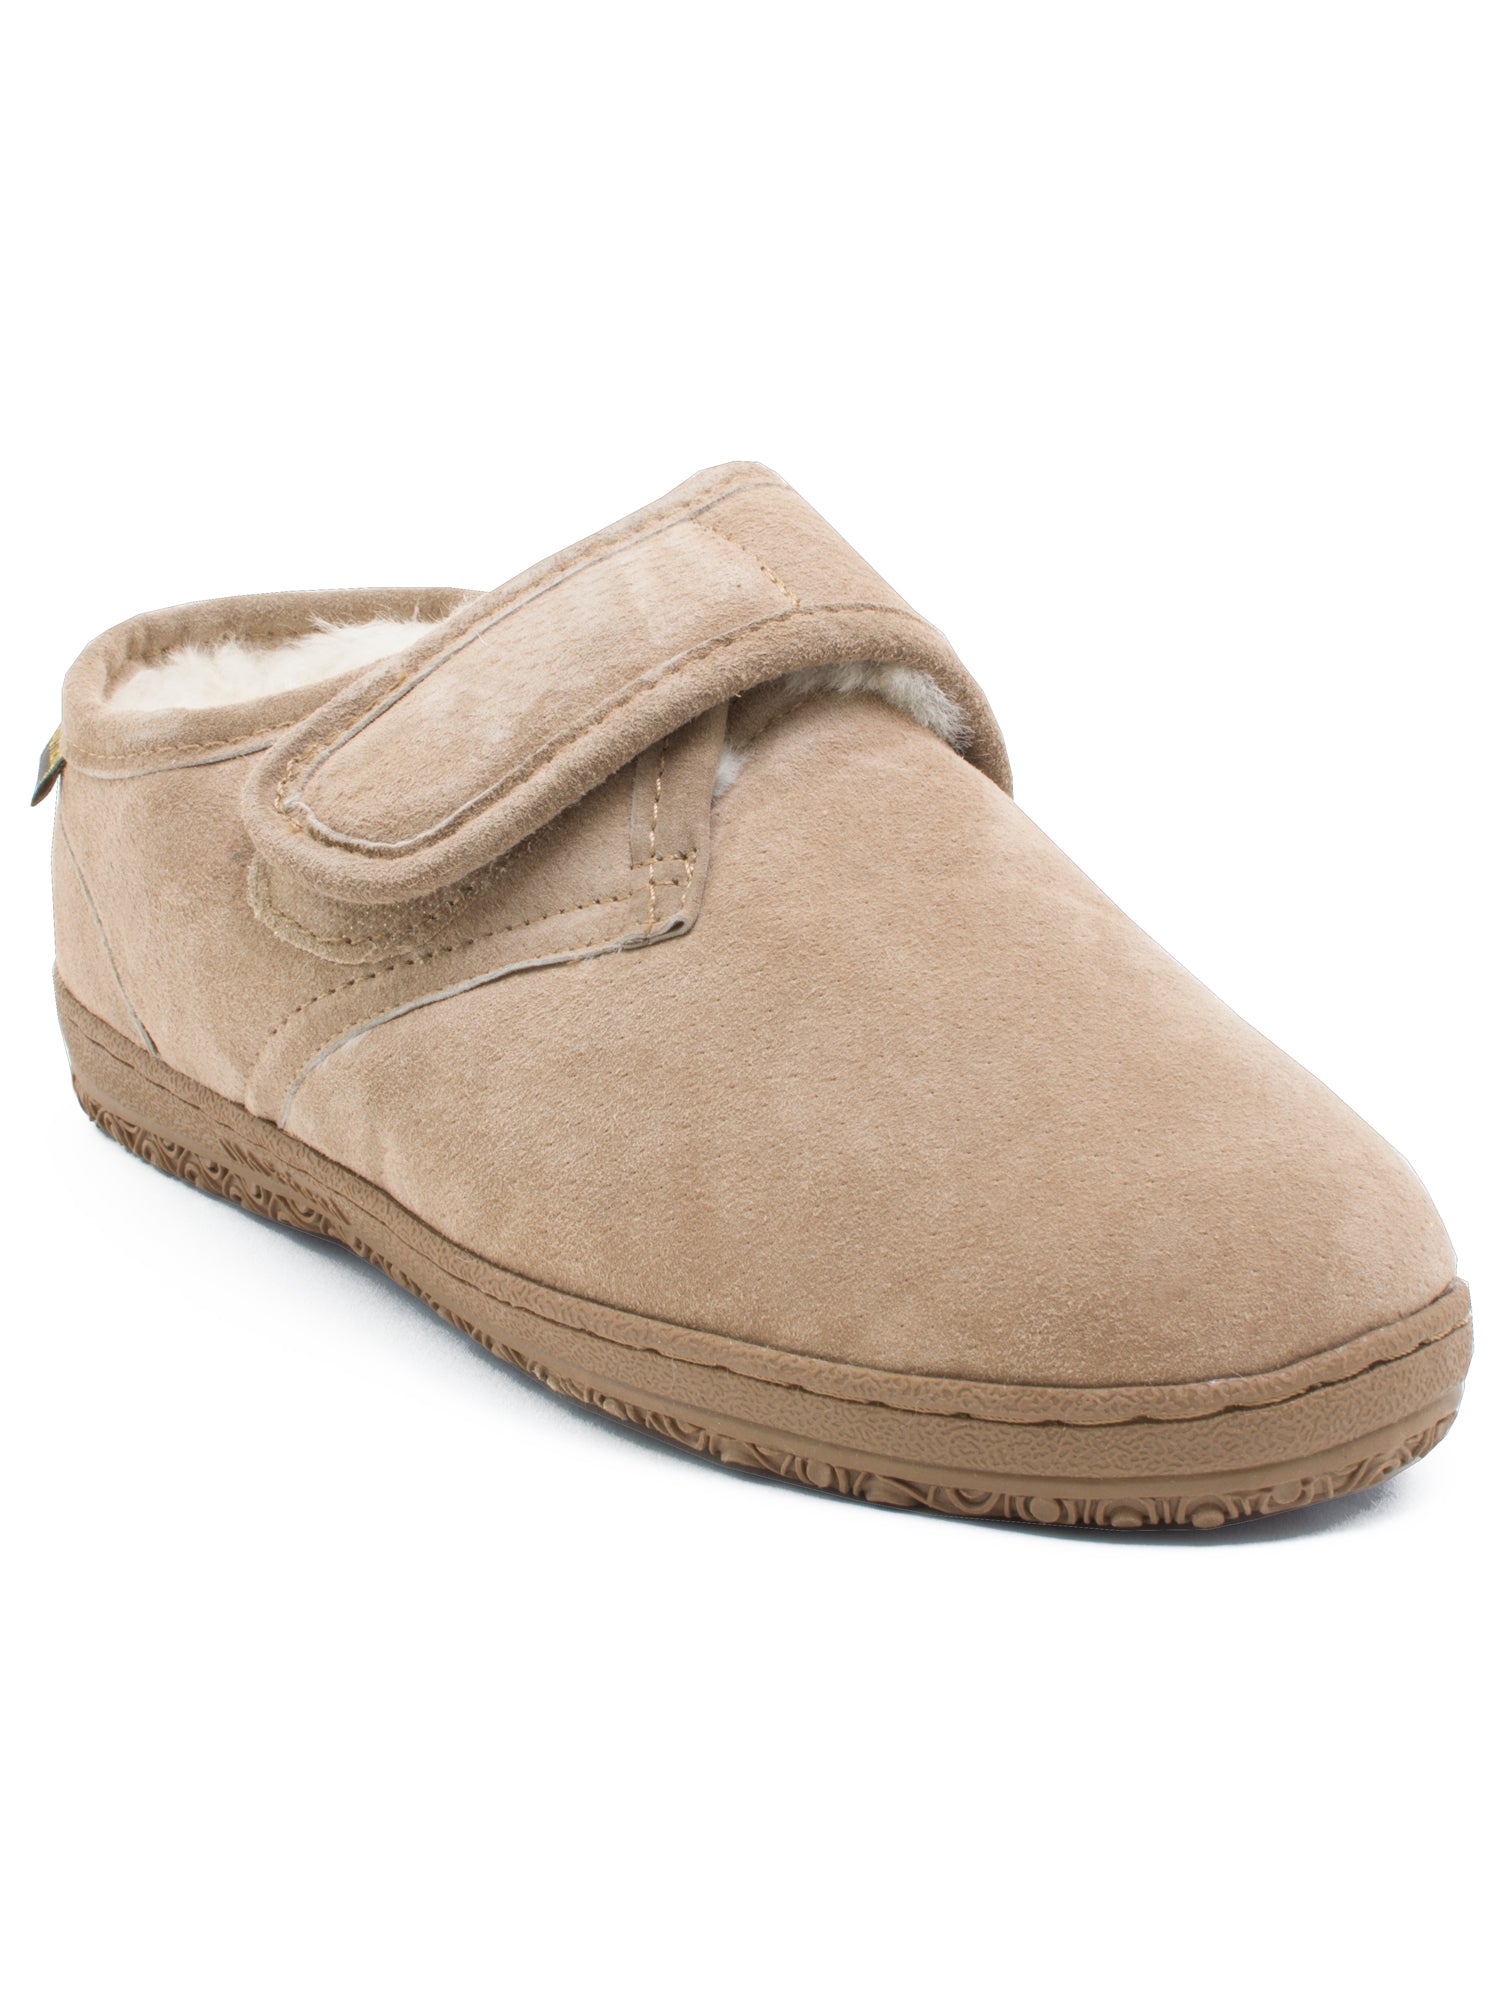 Old Friend's Men's Adjustable Closure Bootee Slippers - Big Man Sizes